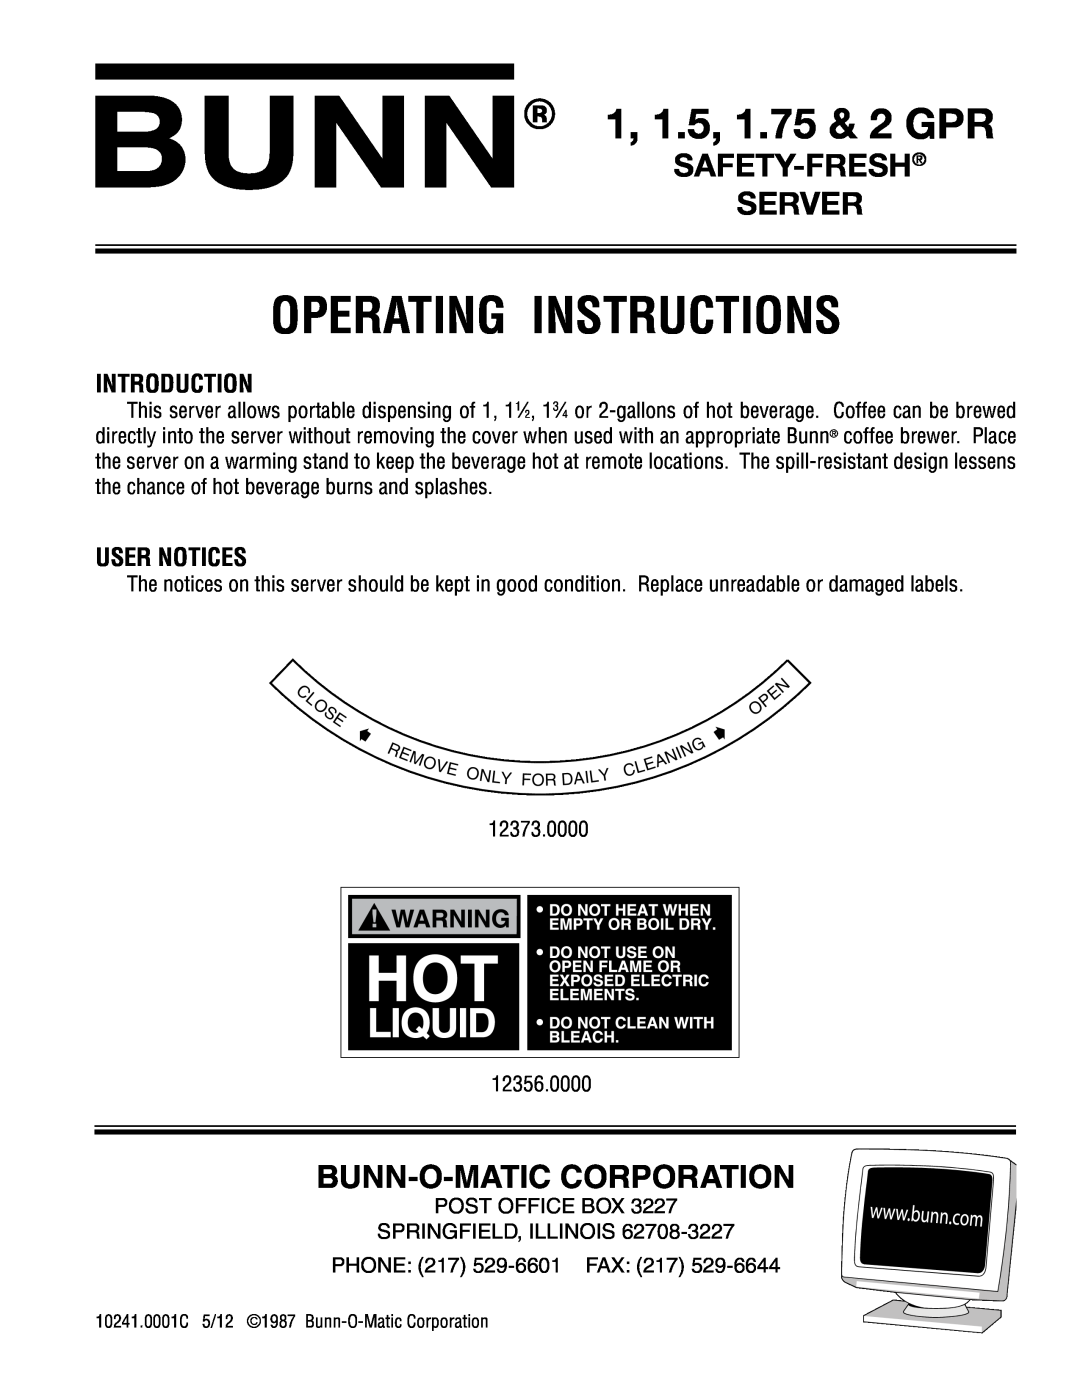 Bunn 12410001C manual Introduction, User Notices, Operating Instructions, 1, 1.5, 1.75 & 2 GPR, Safety-Fresh Server 